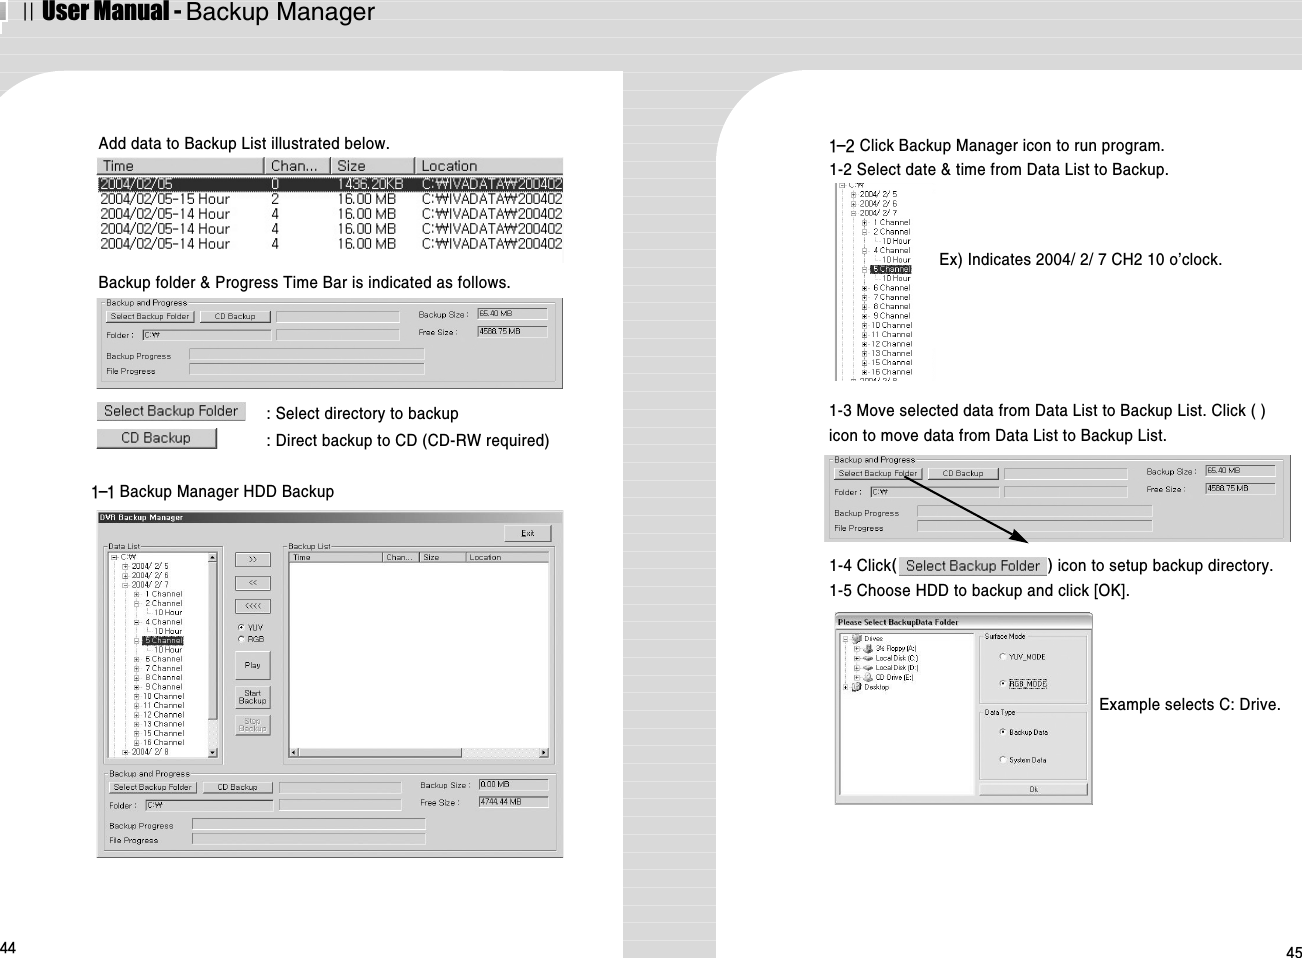 ⅡUser Manual - Backup Manager44 45Add data to Backup List illustrated below.Backup folder &amp; Progress Time Bar is indicated as follows. : Select directory to backup: Direct backup to CD (CD-RW required)1-4 Click() icon to setup backup directory.1-5 Choose HDD to backup and click [OK].Example selects C: Drive.1-1 Backup Manager HDD Backup1-2 Click Backup Manager icon to run program.1-2 Select date &amp; time from Data List to Backup.1-3 Move selected data from Data List to Backup List. Click ( )icon to move data from Data List to Backup List.Ex) Indicates 2004/ 2/ 7 CH2 10 o’clock.